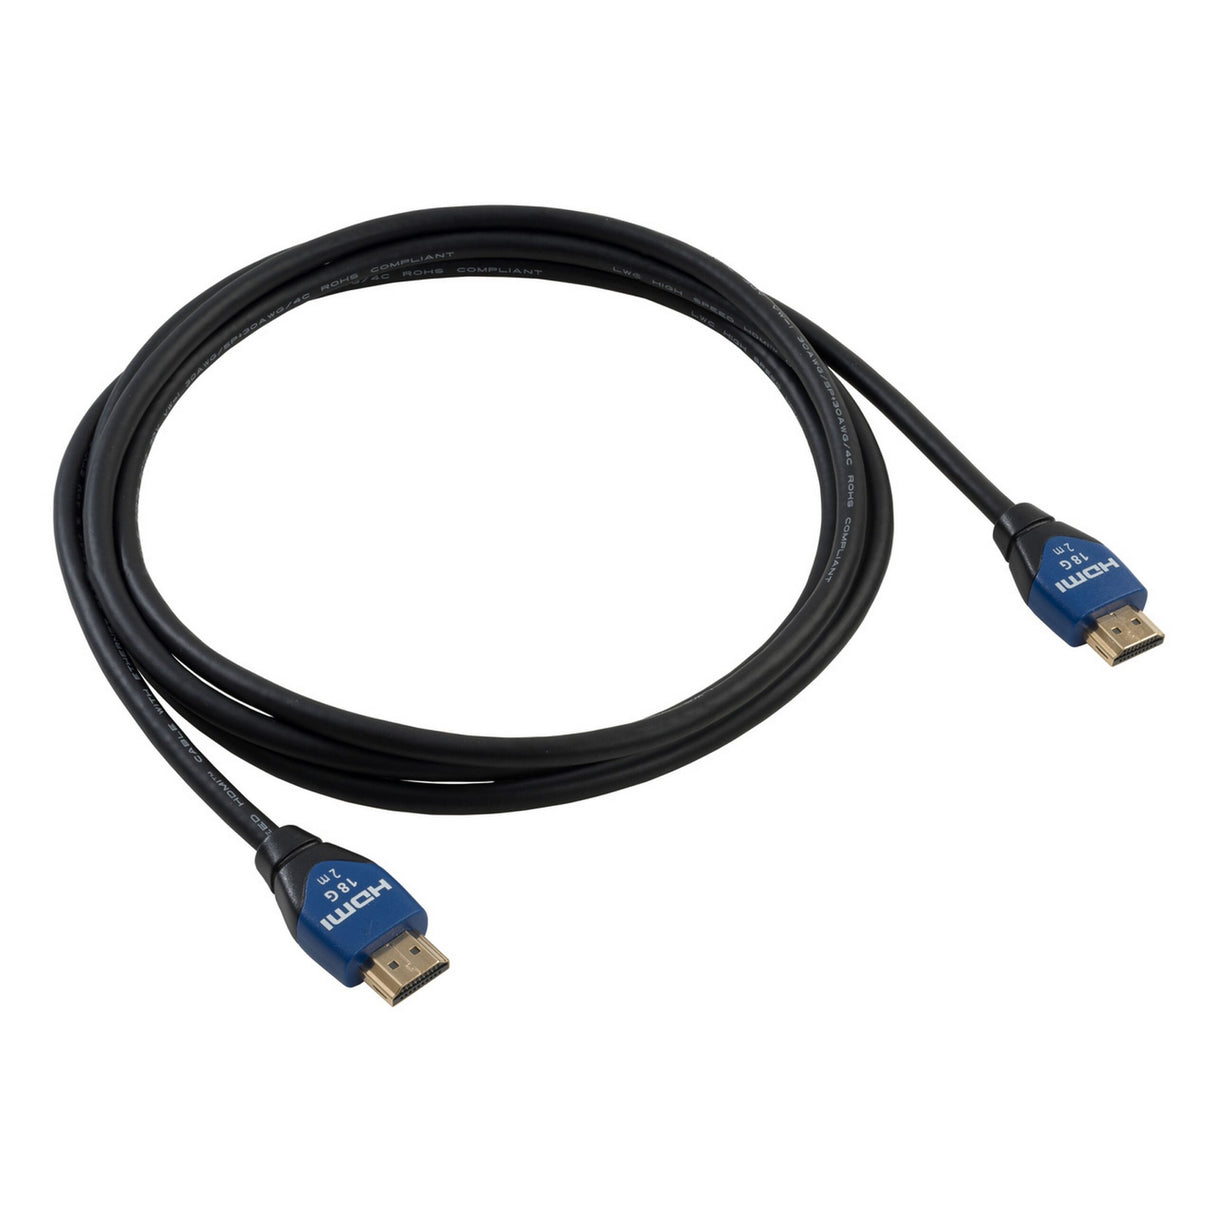 Liberty AV HALO-HC04M 4-Meter HALO Series High Speed HDMI Cable with Ethernet